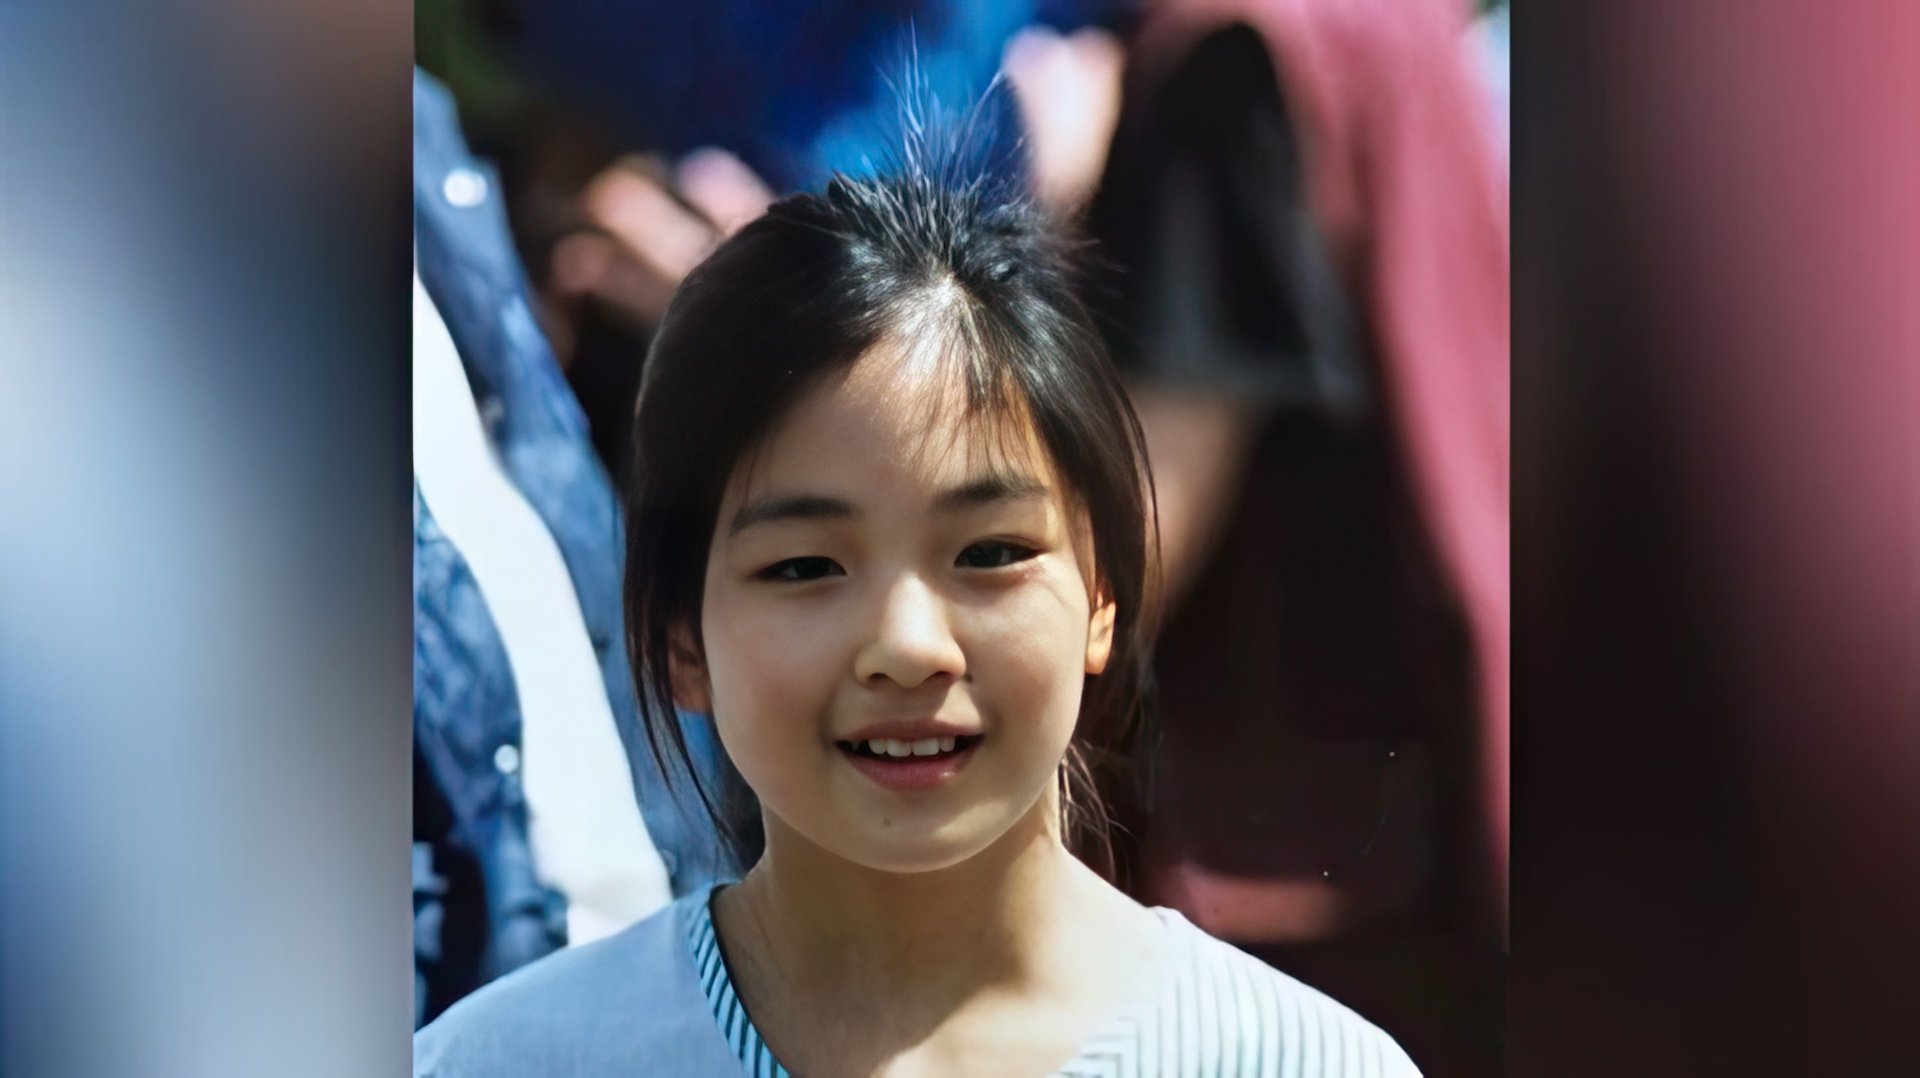 Picture of Constance Wu during her school years